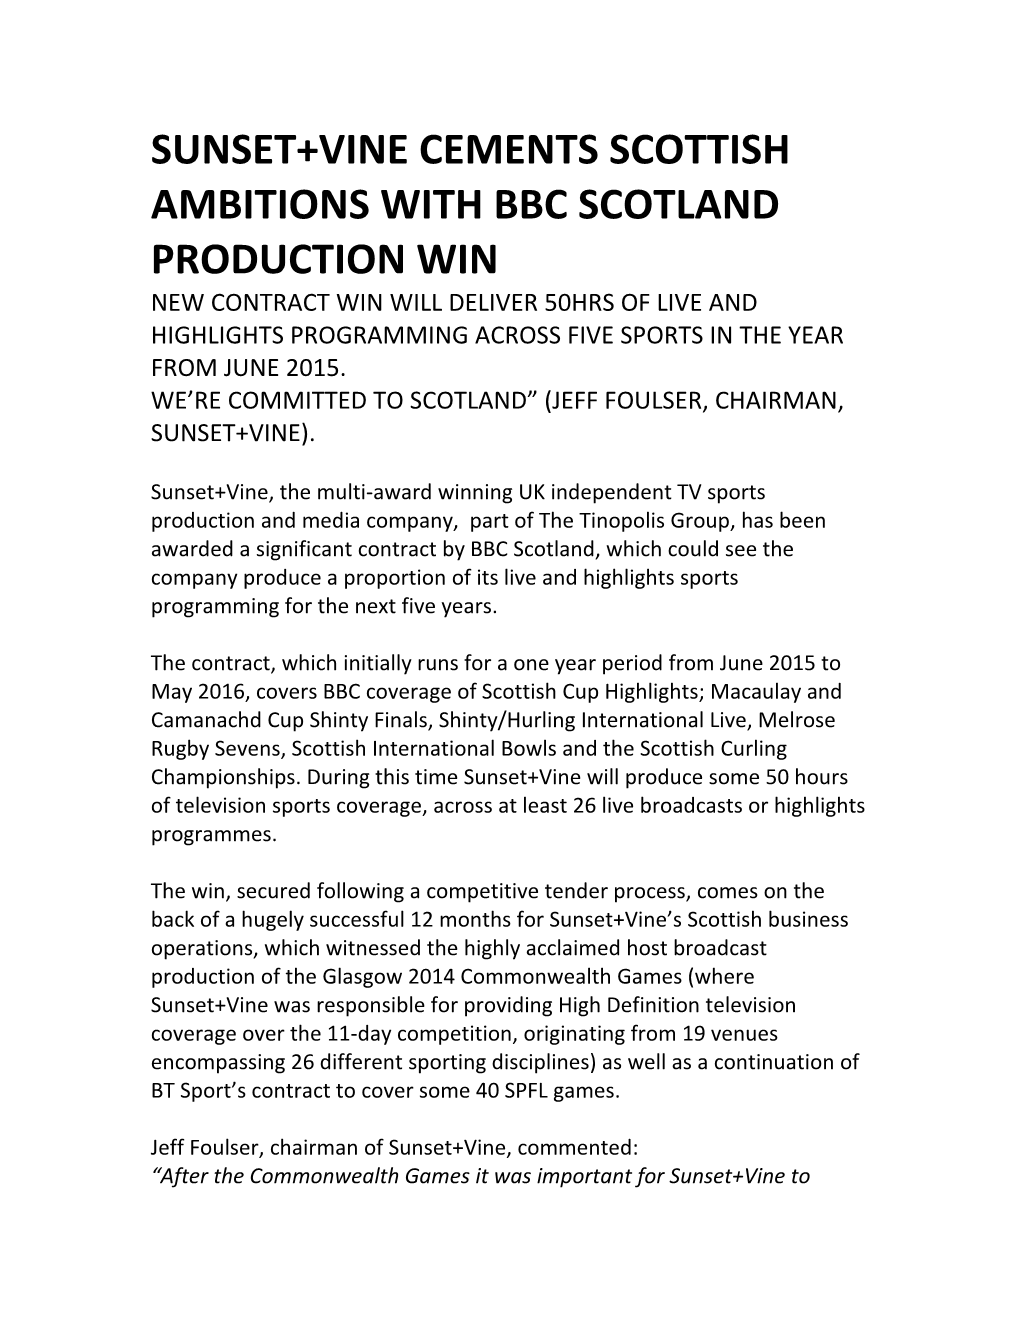 Sunset+Vine Cements Scottish Ambitions with Bbc Scotland Production Win